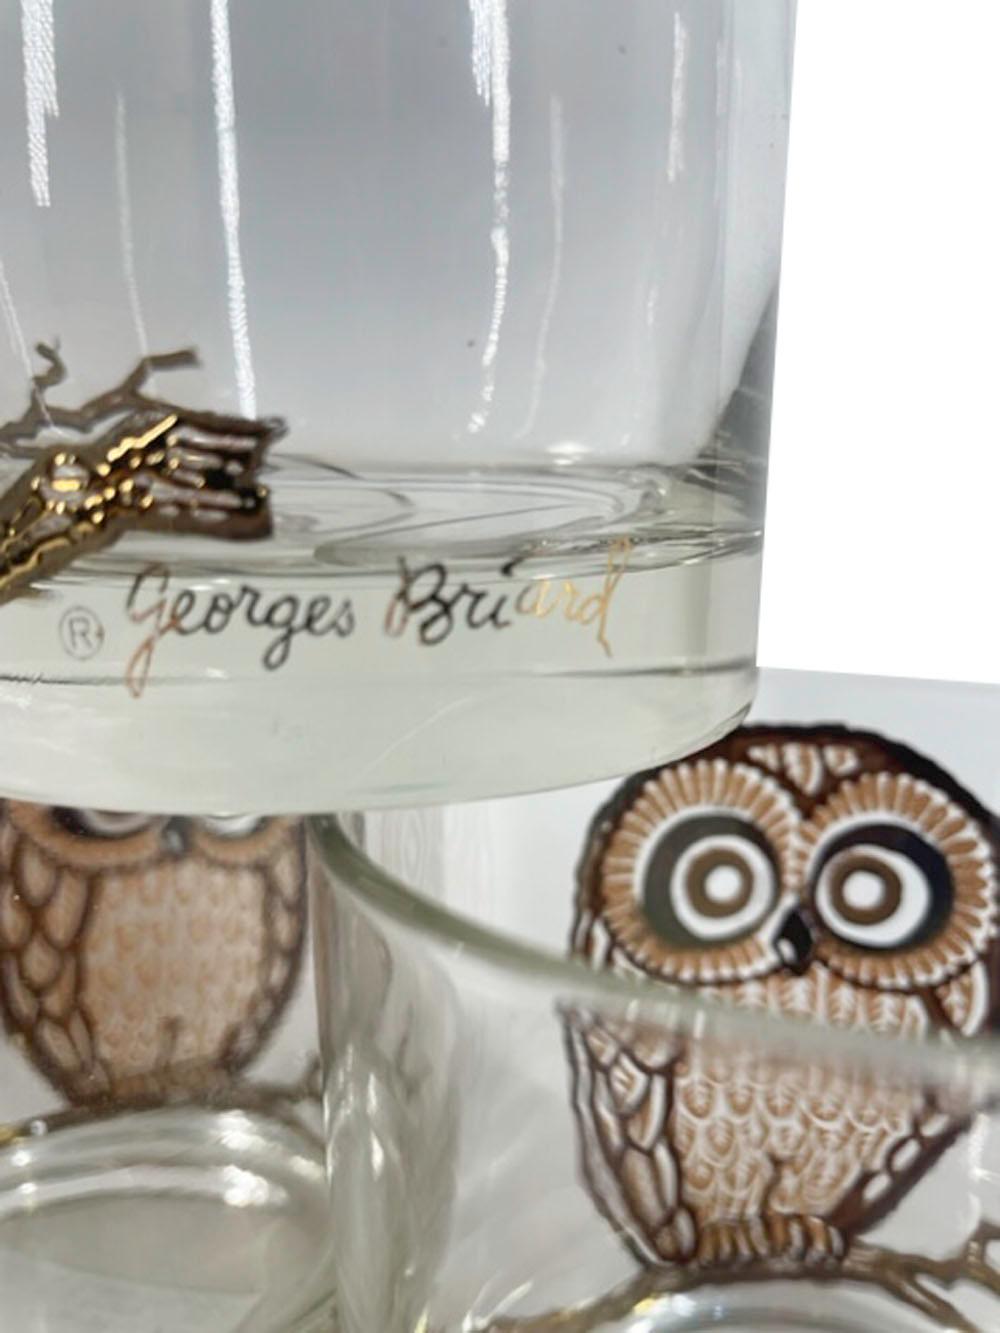 Six Mid-Century Modern rocks glasses designed by and signed Georges Briard with a large 22k gold and tan enamel owl on a branch. This 3-1/4